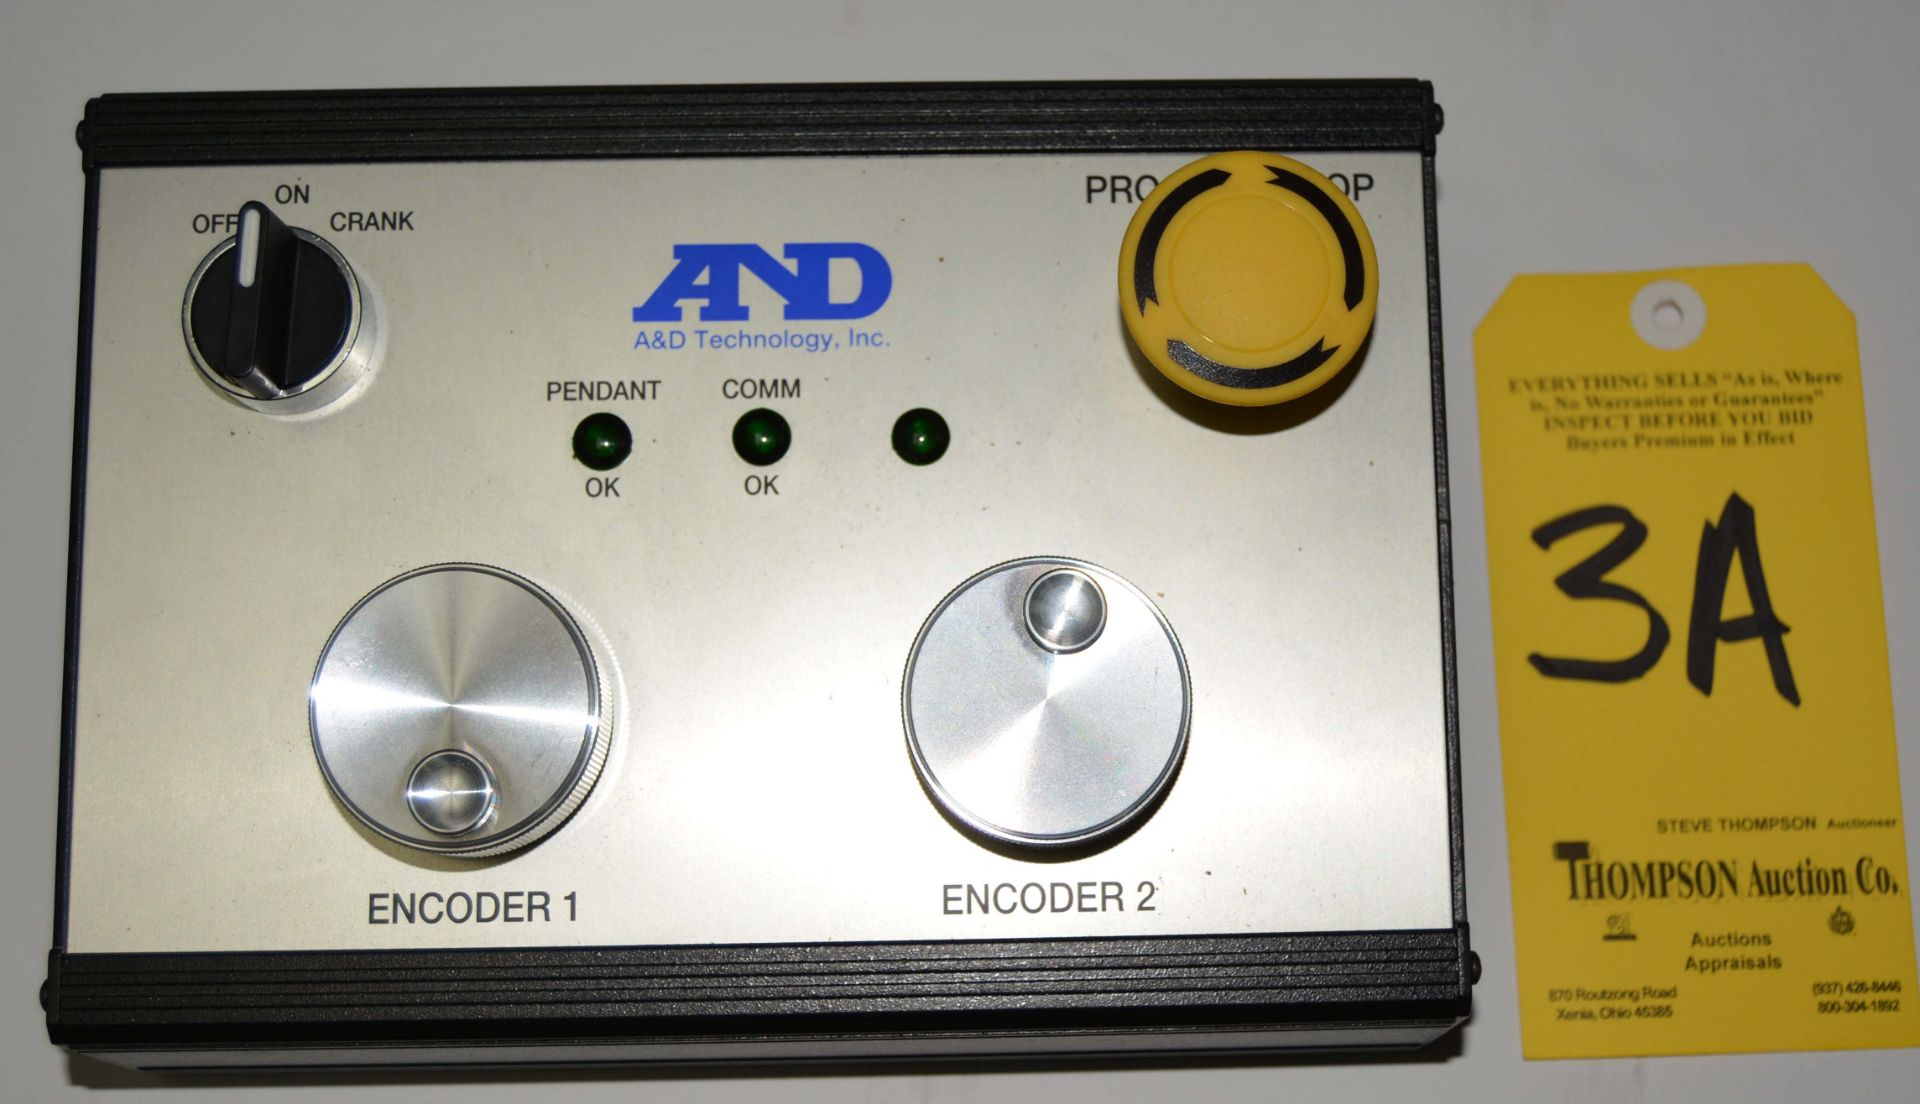 A&D Mini Operator Pendant Model 435, s/n 156360413, 2 Optical Controllers, Serial Interface to iTest